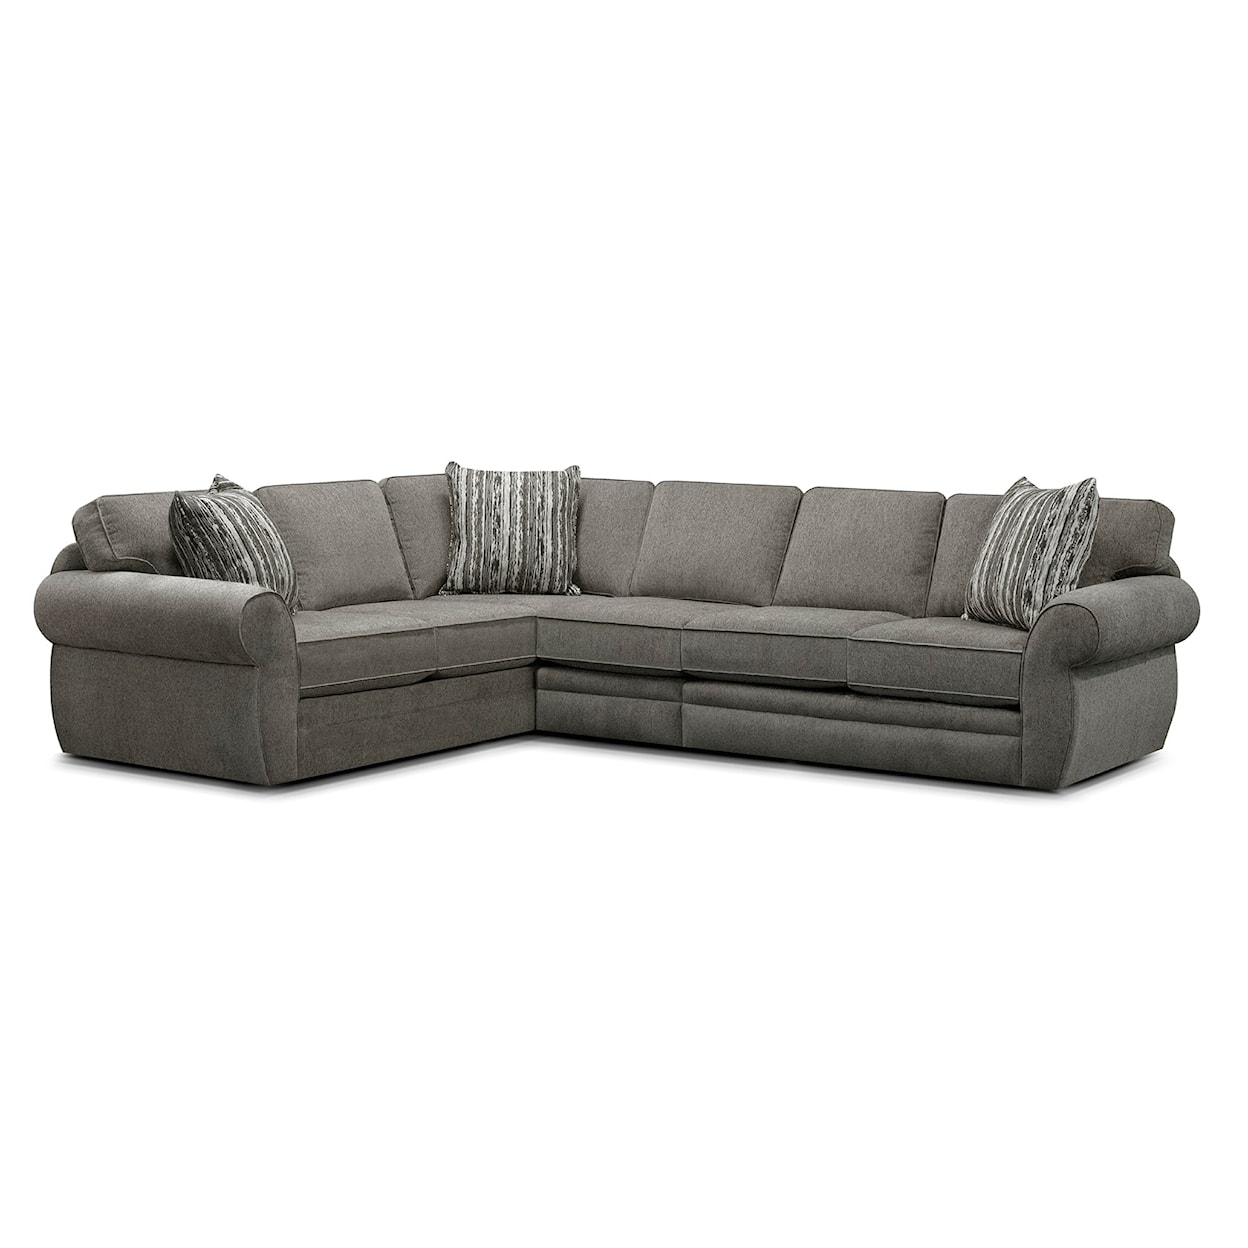 Tennessee Custom Upholstery 5S00 Series 3-Piece Sectional